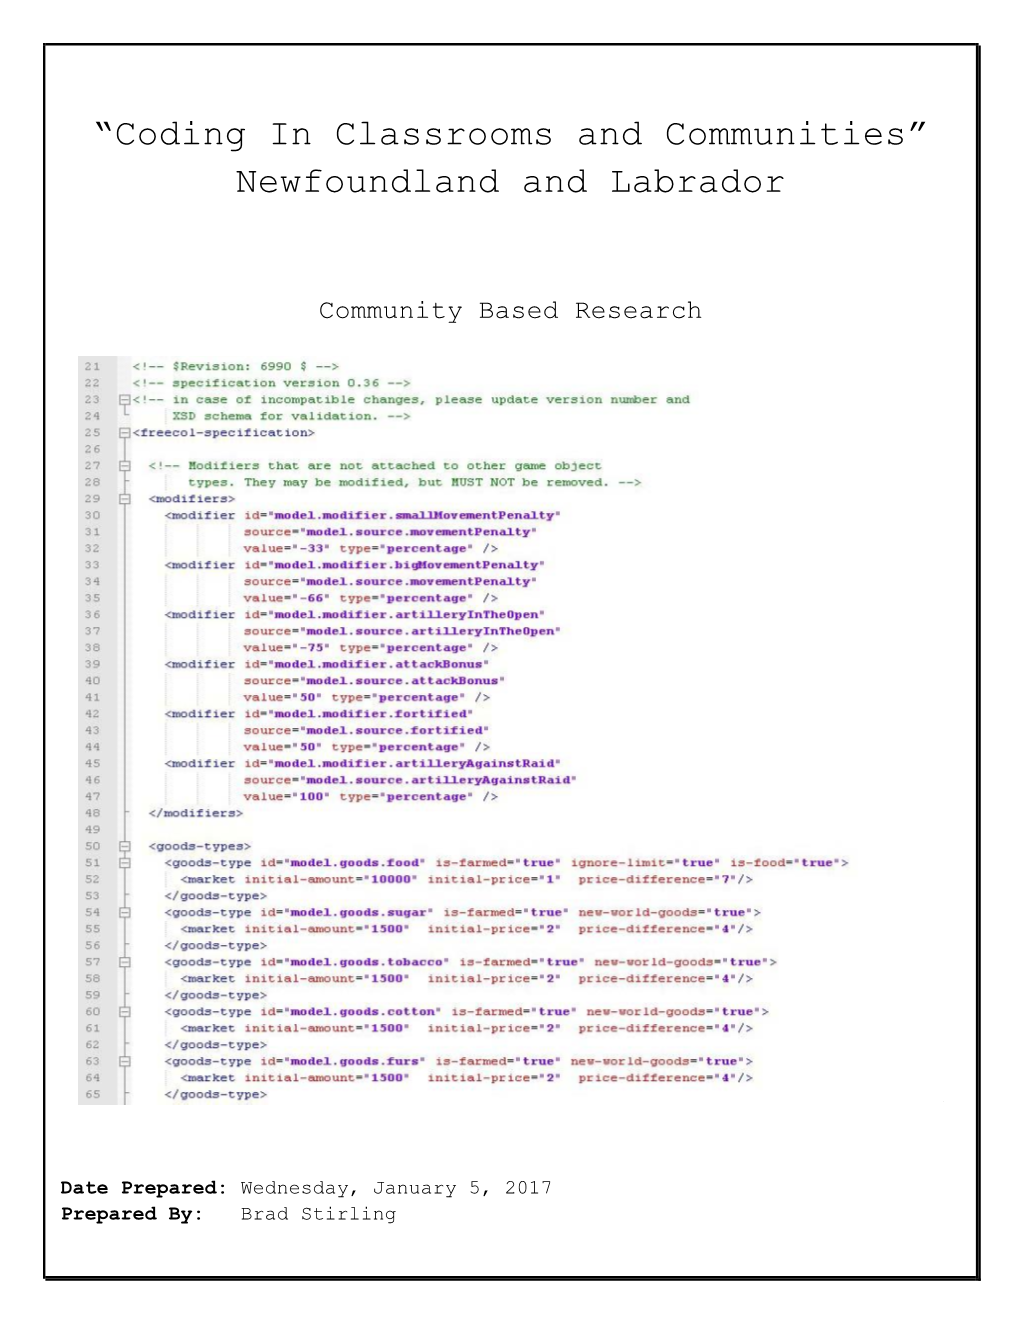 “Coding in Classrooms and Communities” Newfoundland and Labrador